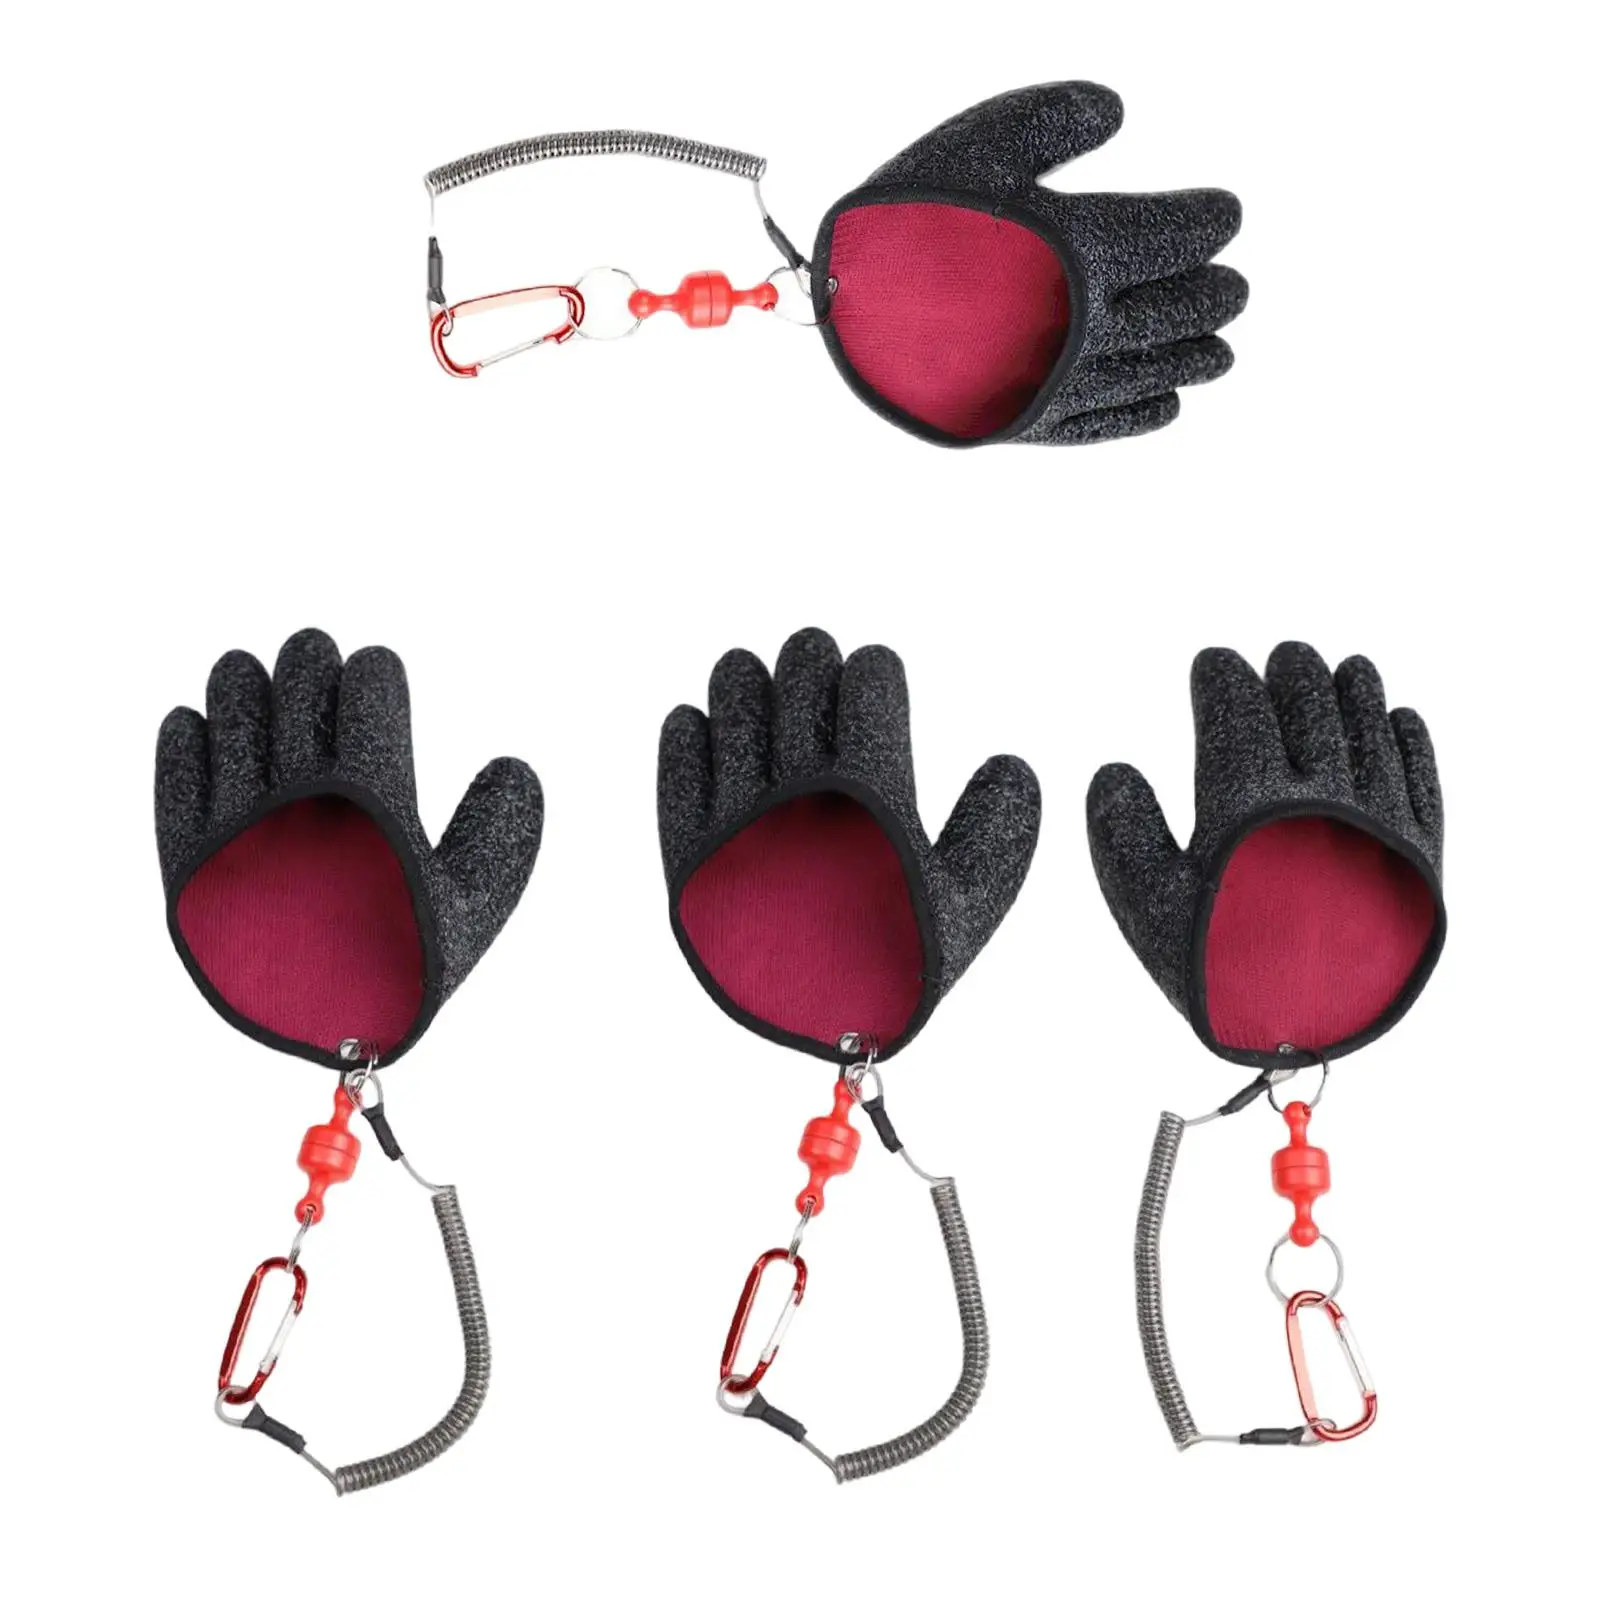 Fishing Gloves Puncture Resistant Anti Slip Waterproof Fish Glove Professional for Outdoor Activities Catch Fish Cleaning